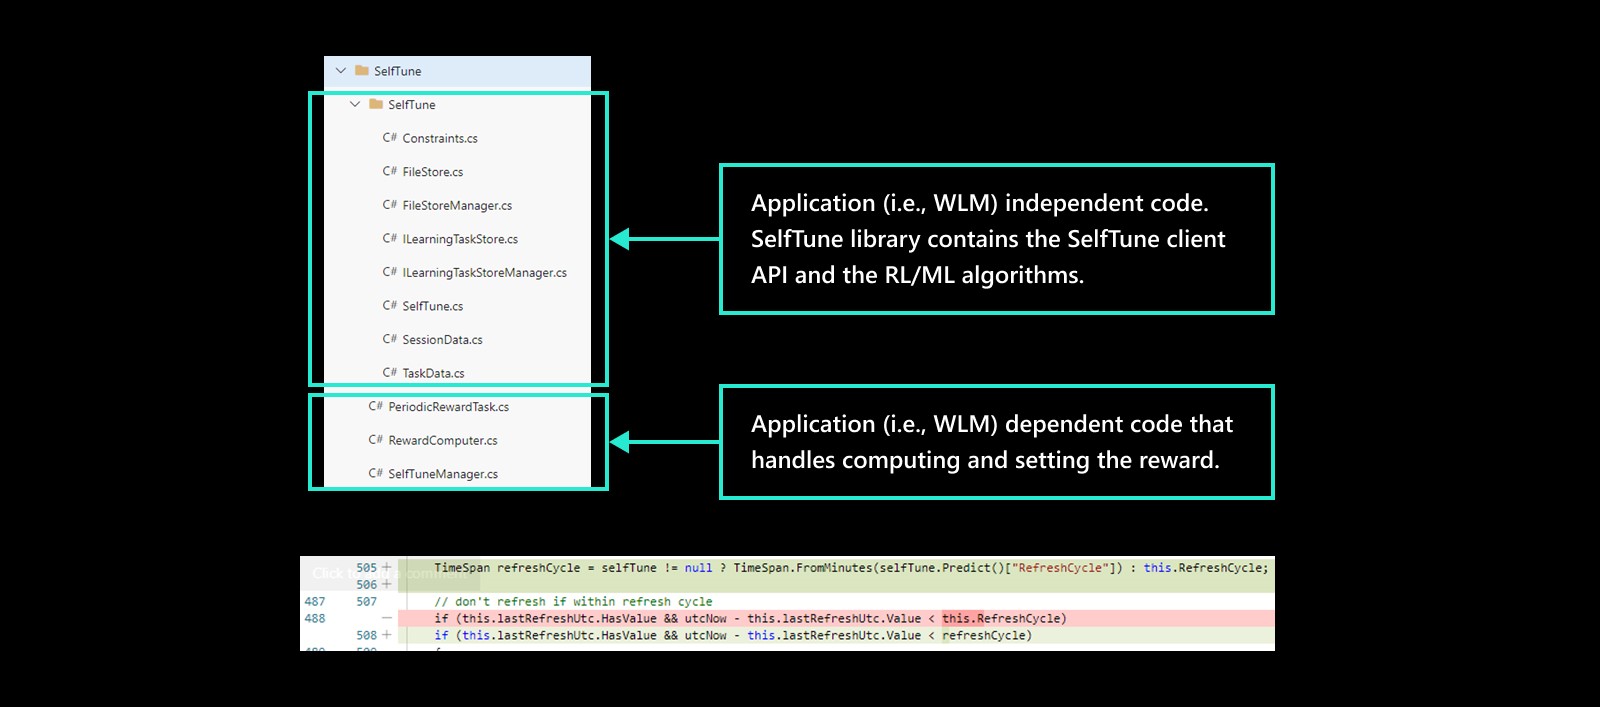 SelfTune Application library contains the SelfTune client API and the RL/ML algorithms